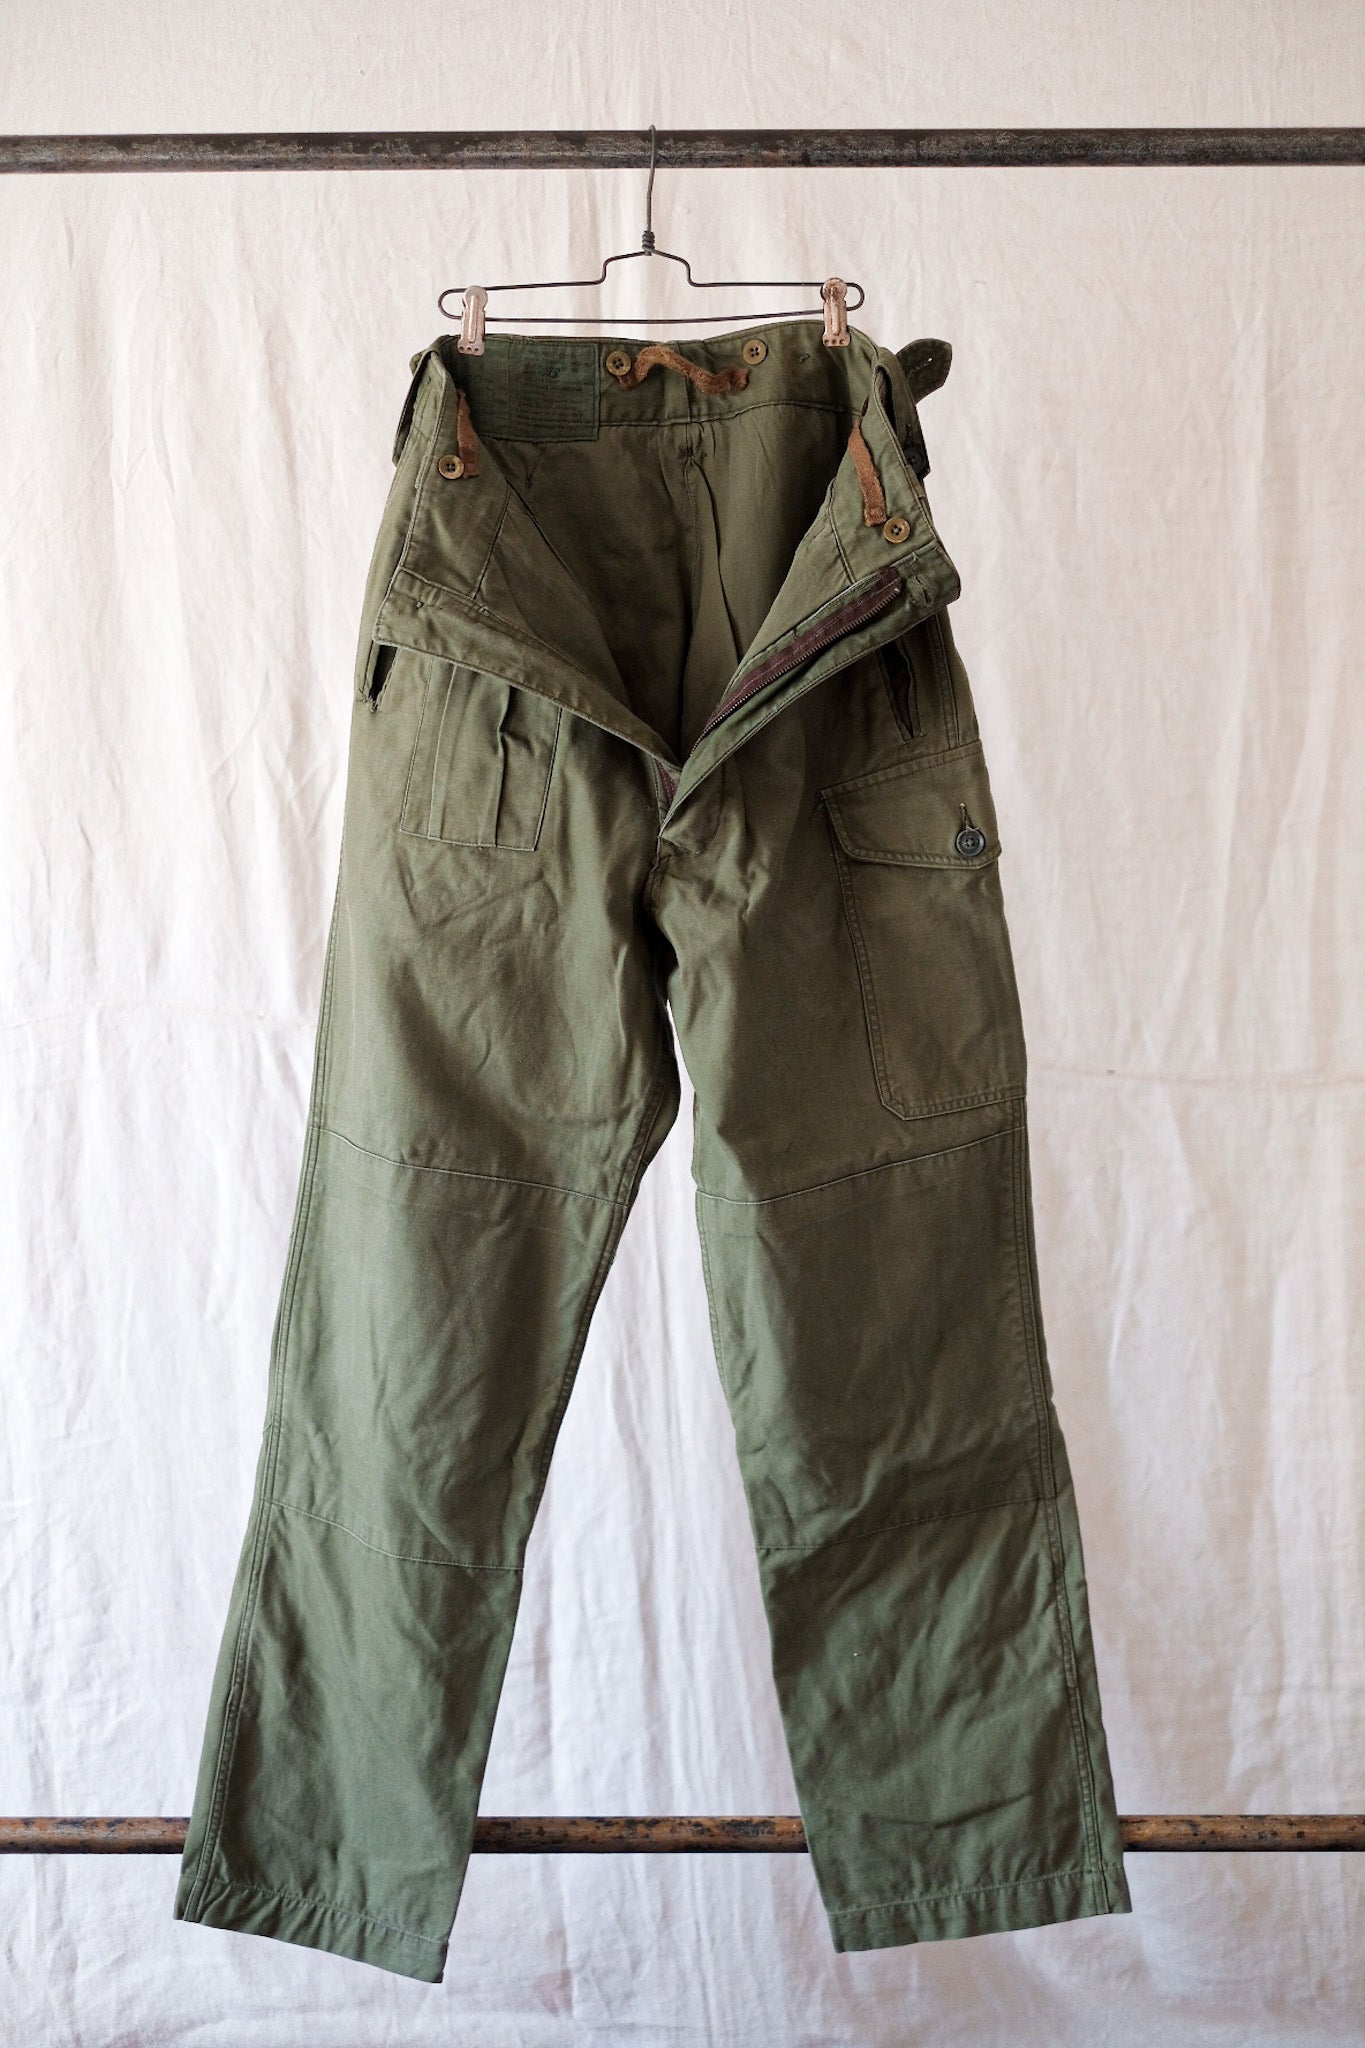 Vintage】イギリス軍 COMBAT TROUSERS 1952 1960 Pattern BRITISH ARMY ...